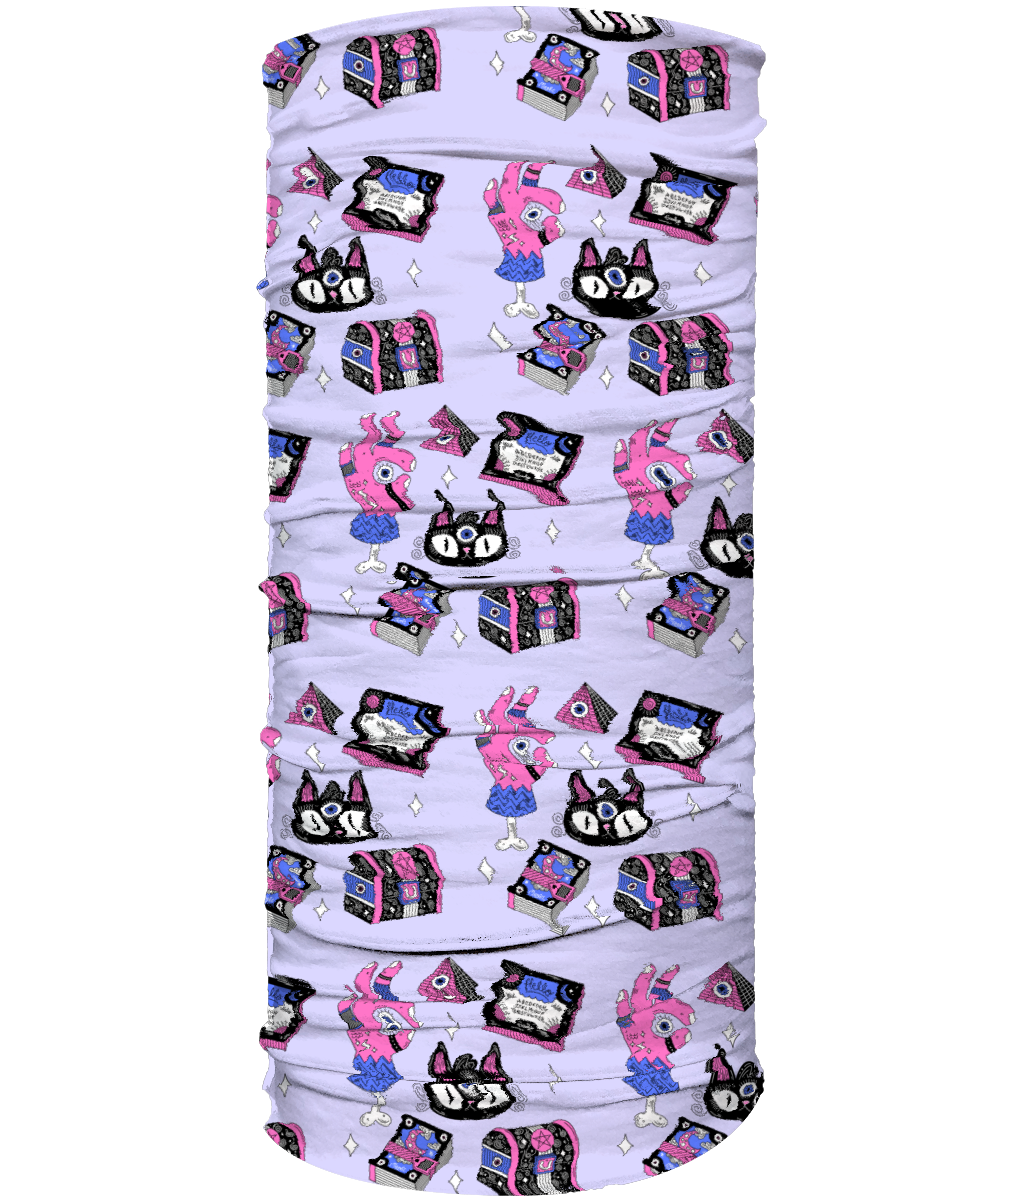 Cosmic Kitty Multi Use Face Covering/Morf